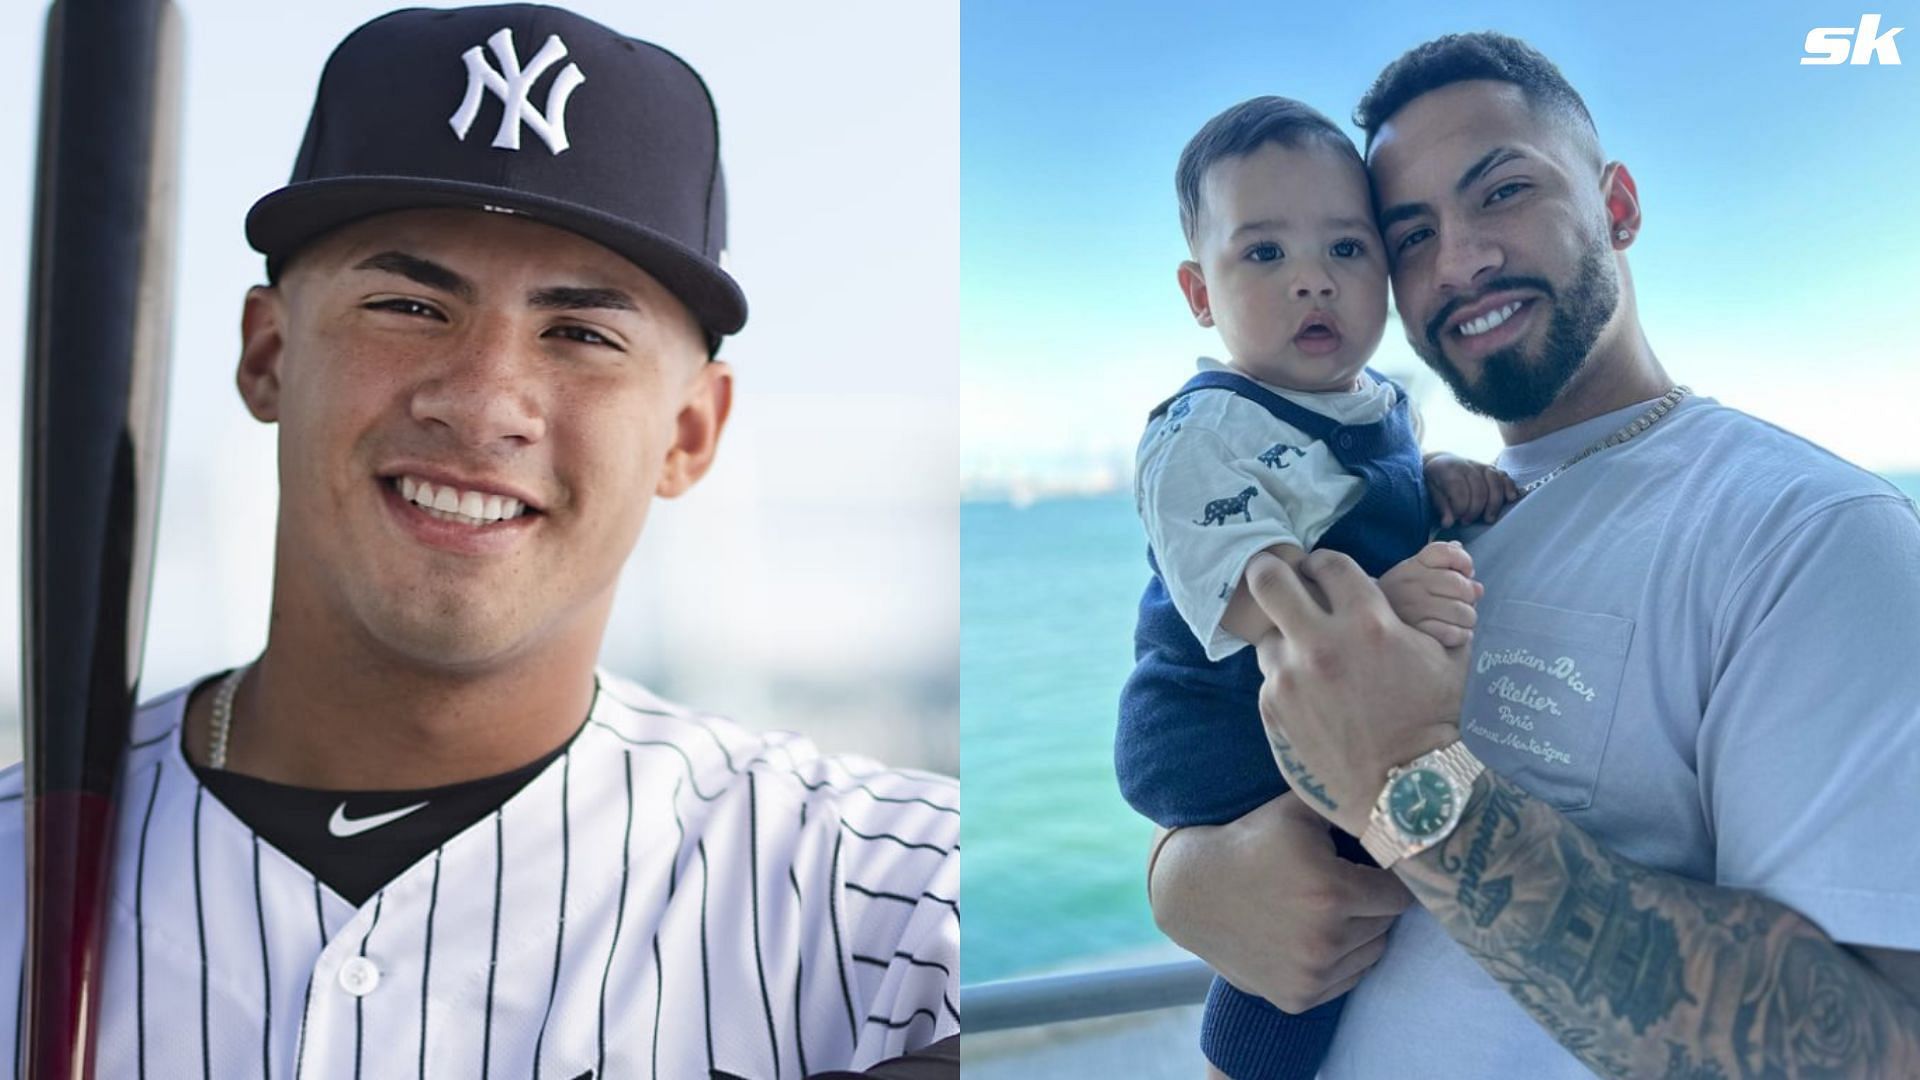 Gleyber Torres shares an adorable moment with son Ethan at Yankee stadium